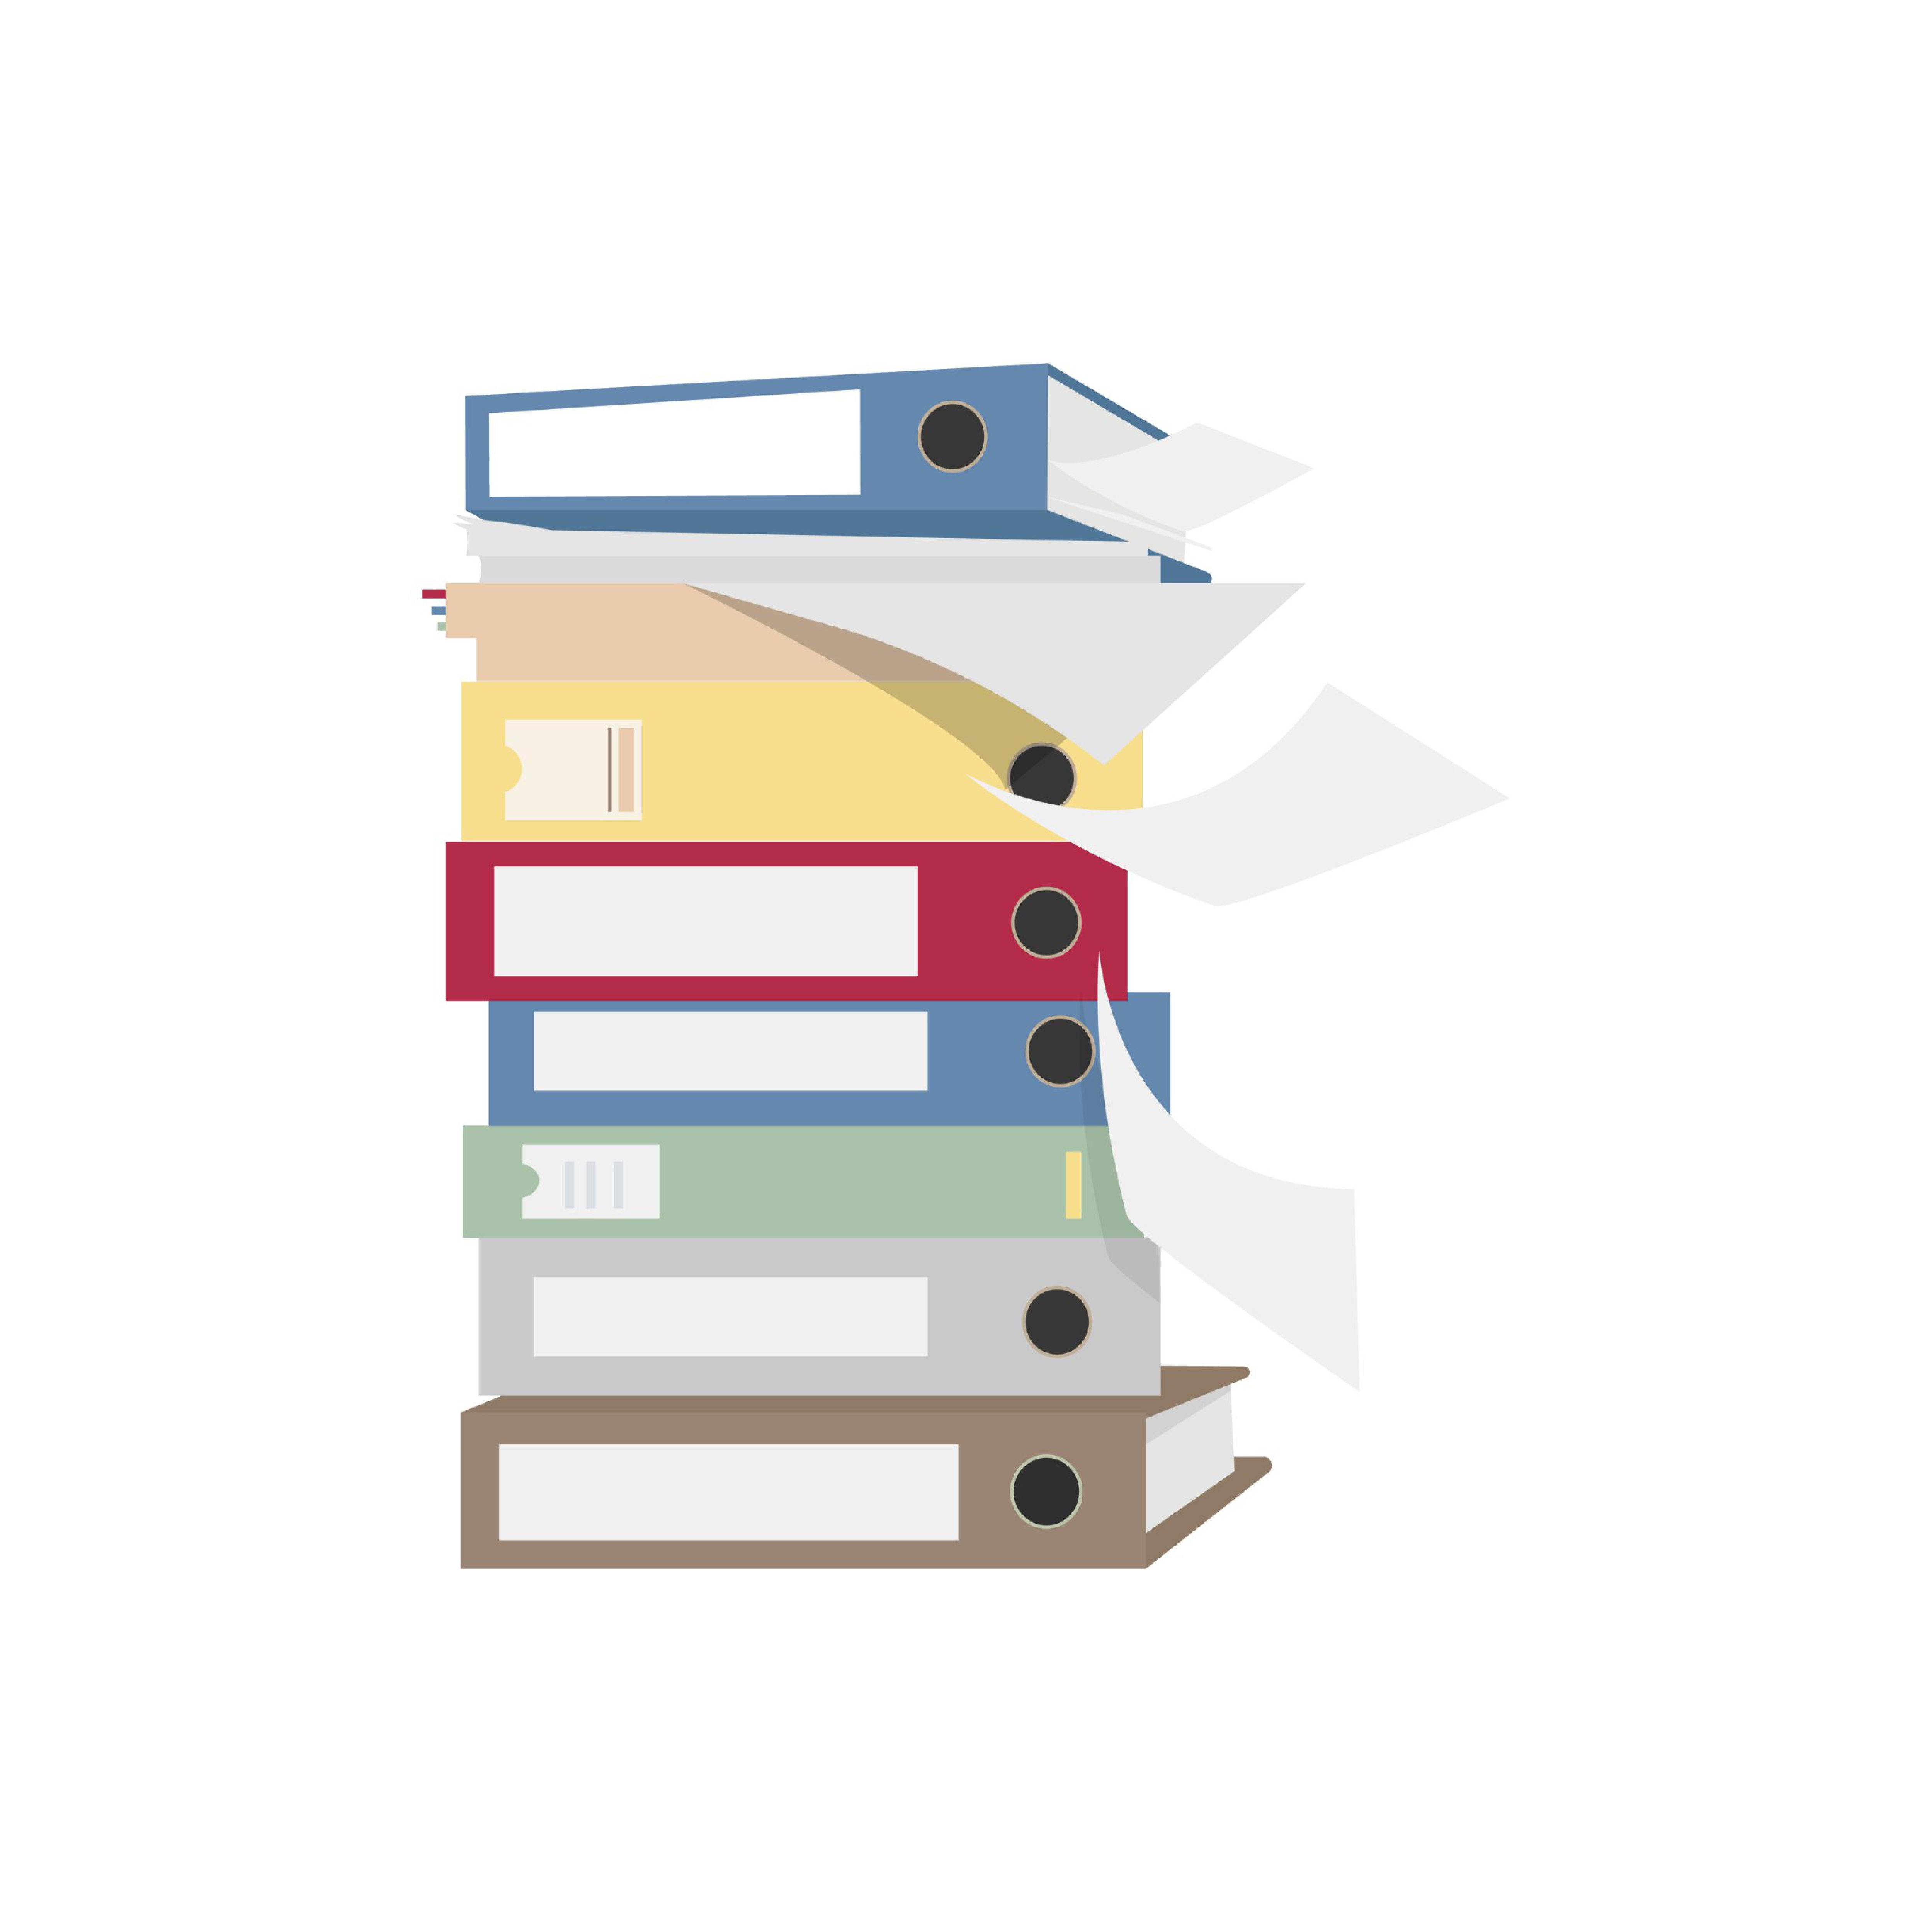 Pile of files and folders graphic illustration